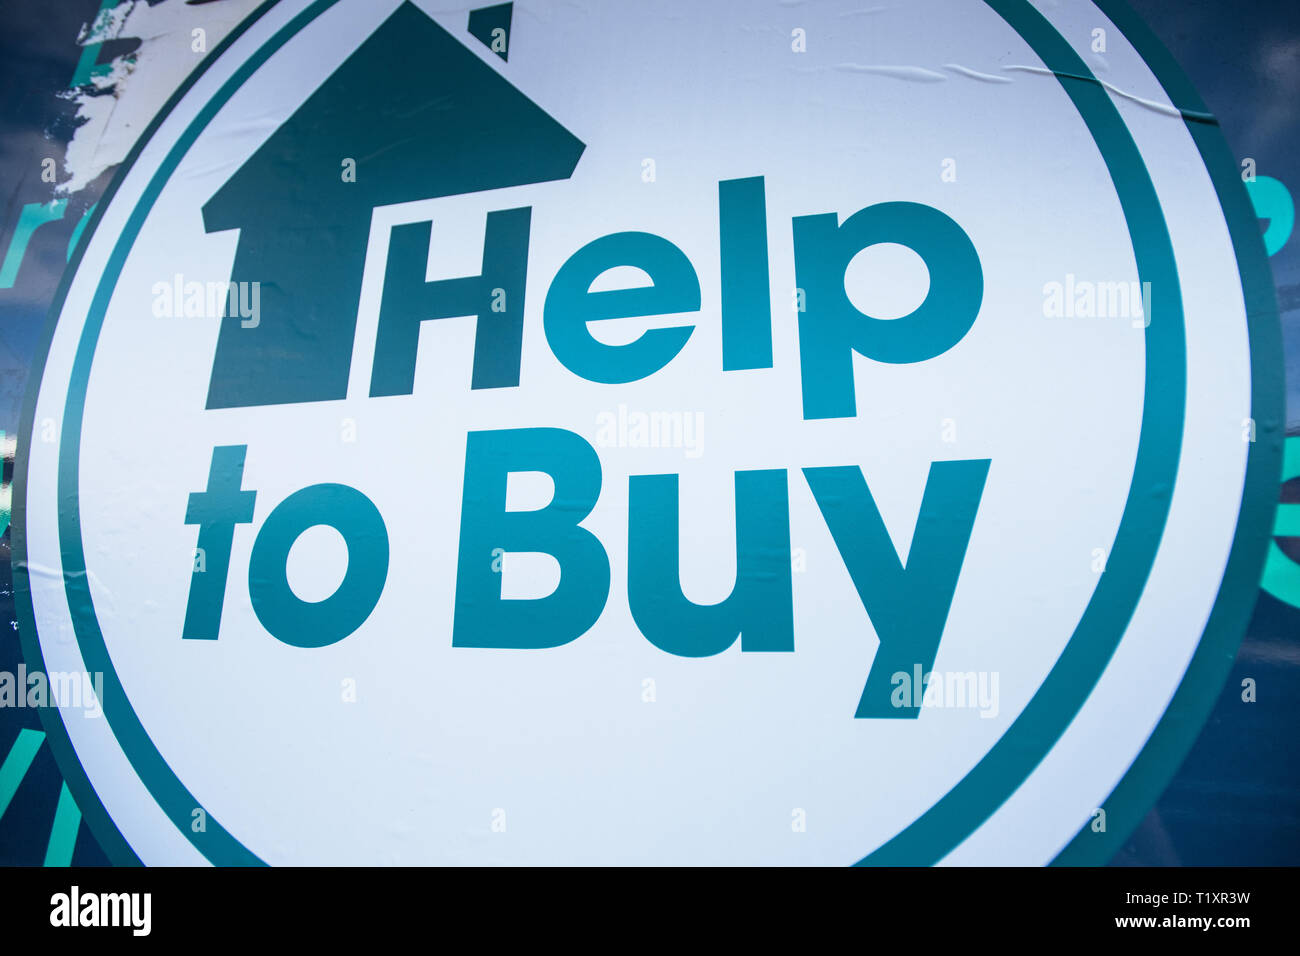 Help to Buy sign. Manchester, UK. Stock Photo